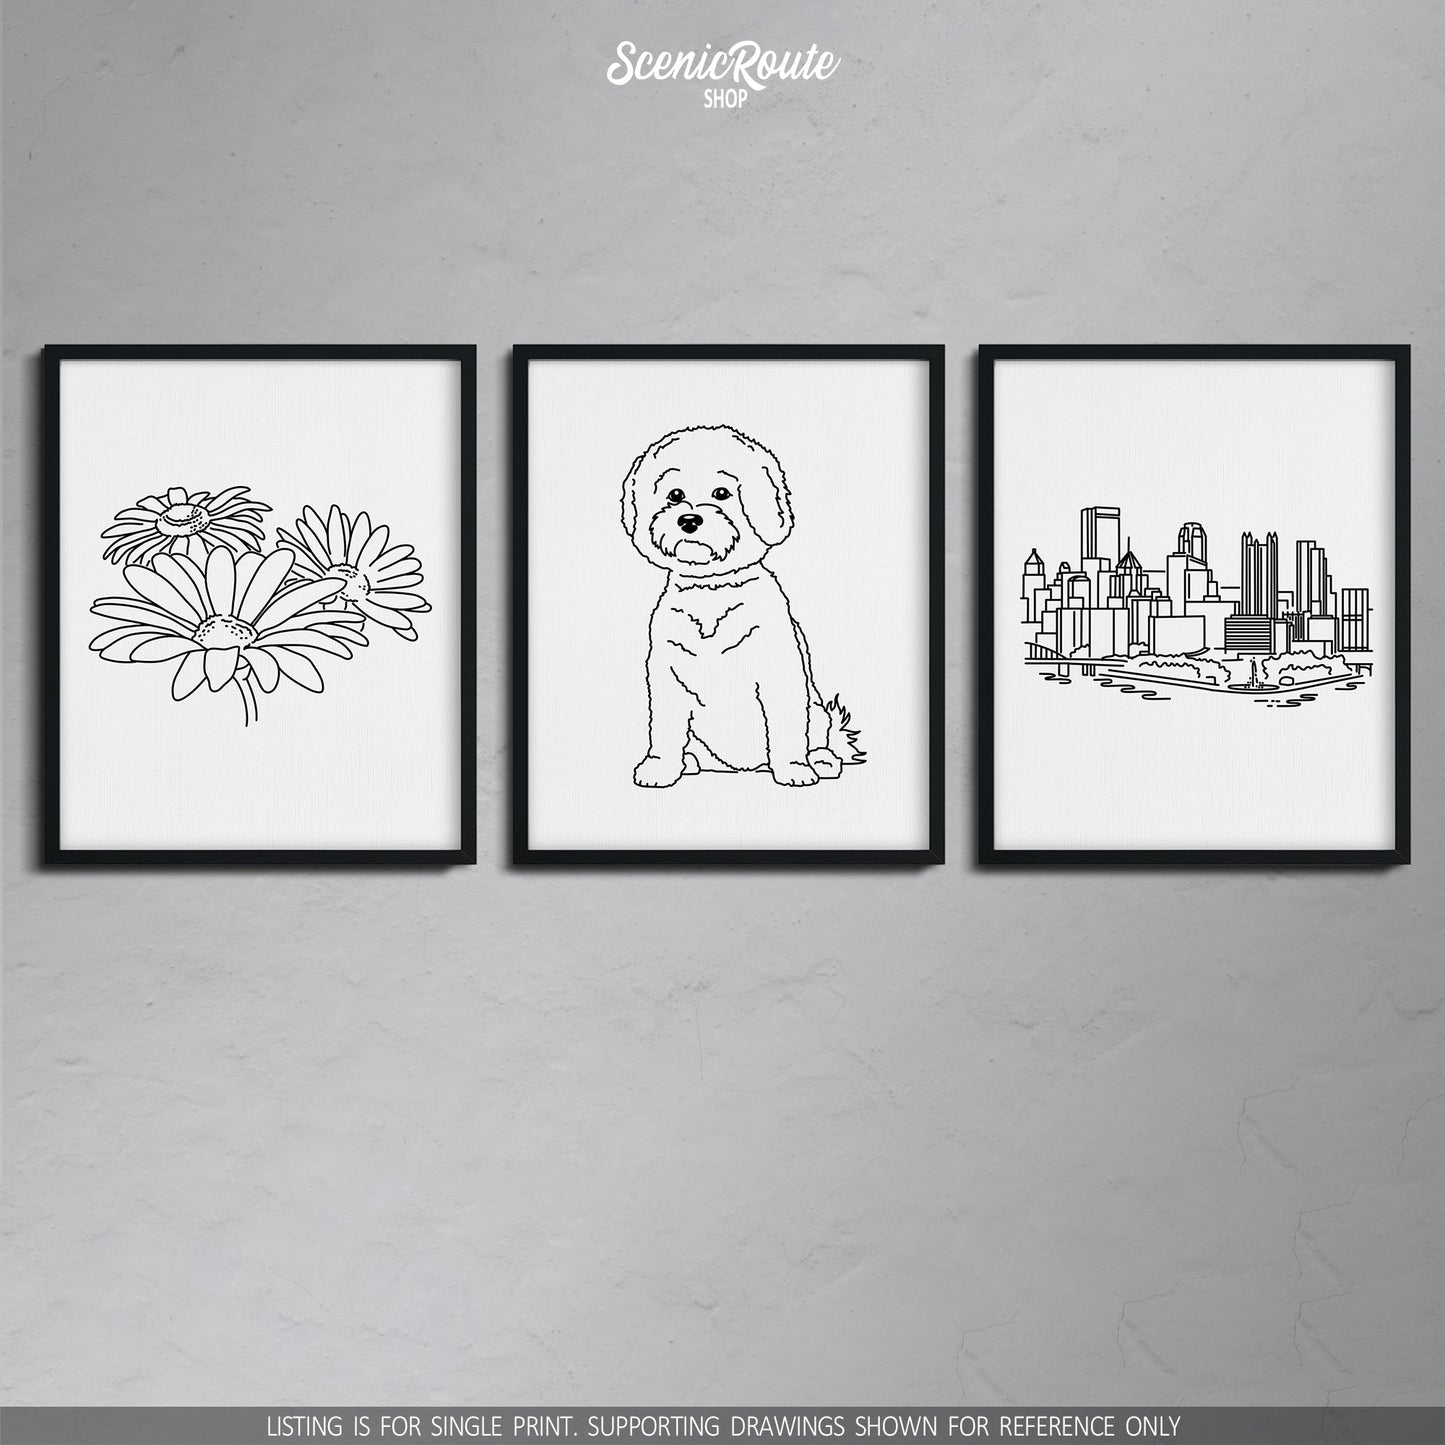 A group of three framed drawings on a gray wall. The line art drawings include daisies, a Bichon Frise dog, and the Pittsburgh Skyline